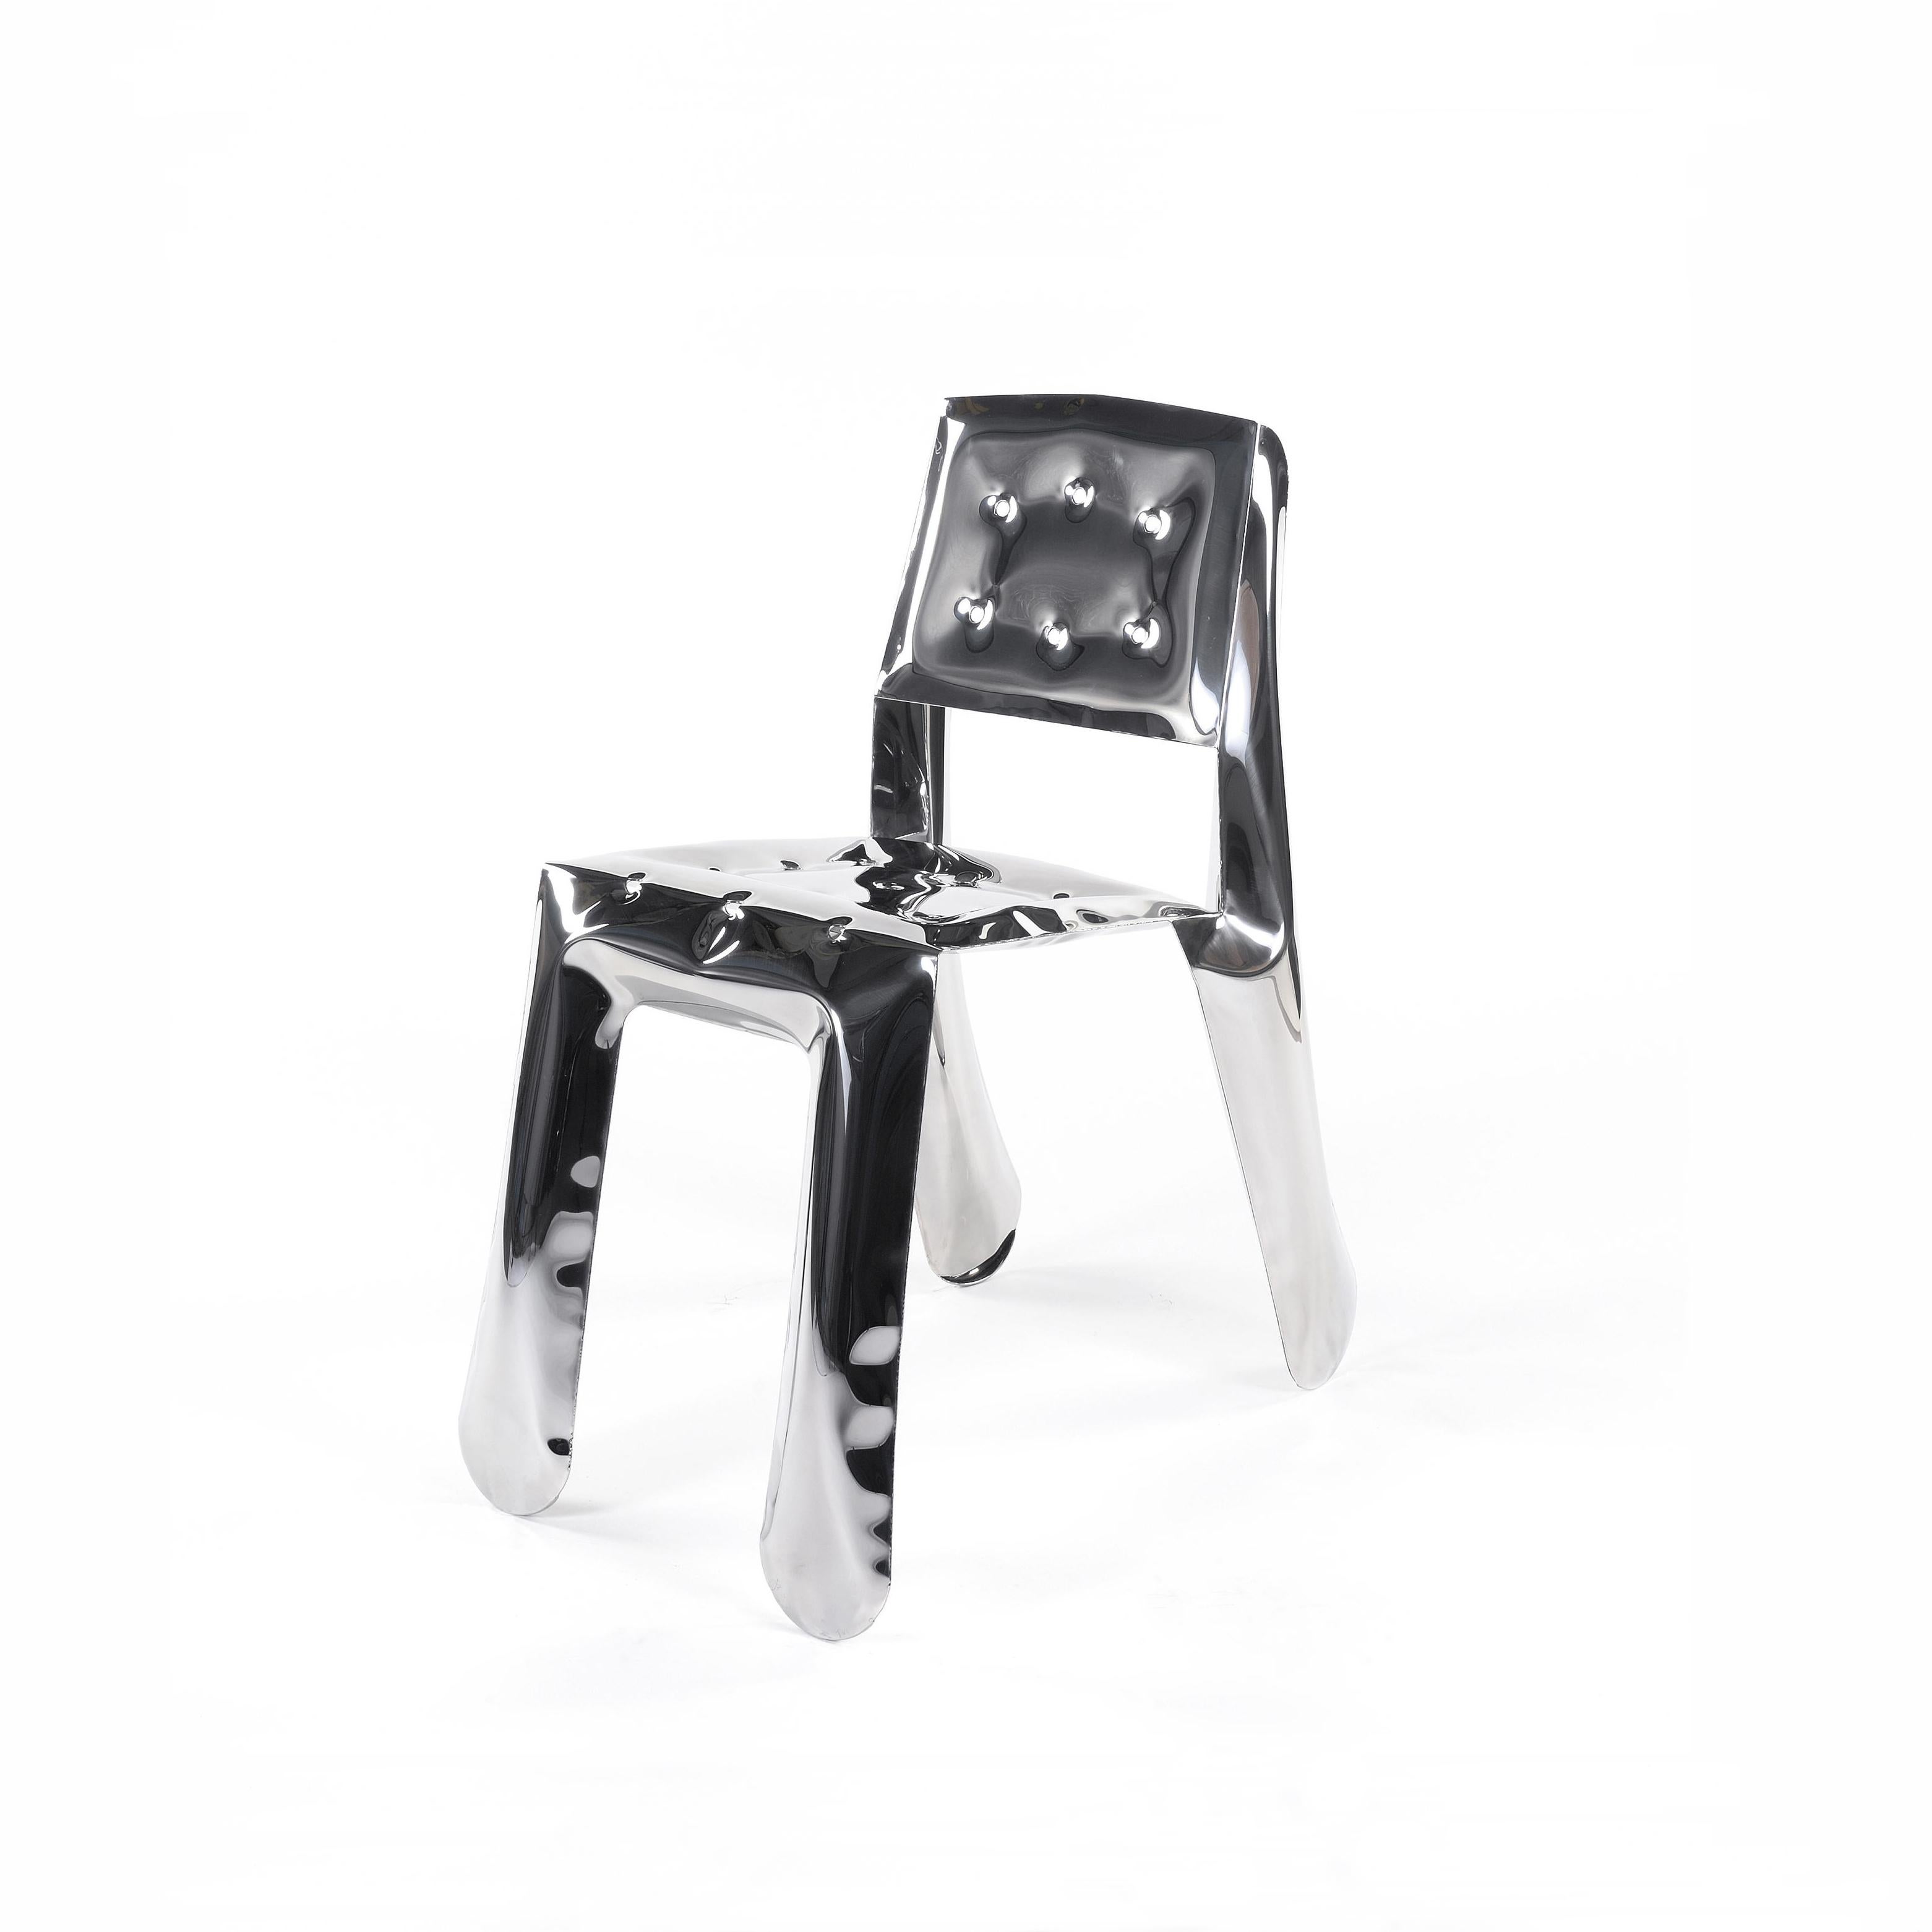 Stainless Steel Chippensteel 0.5 Sculptural Chair by Zieta
Dimensions: D 58 x W 46 x H 80 cm 
Material: Stainless steel. 
Finish: Polished.
Also available in colors: Flamed gold, cosmic blue, stainless steel, or powder-coated. 


Chippensteel 0.5 is